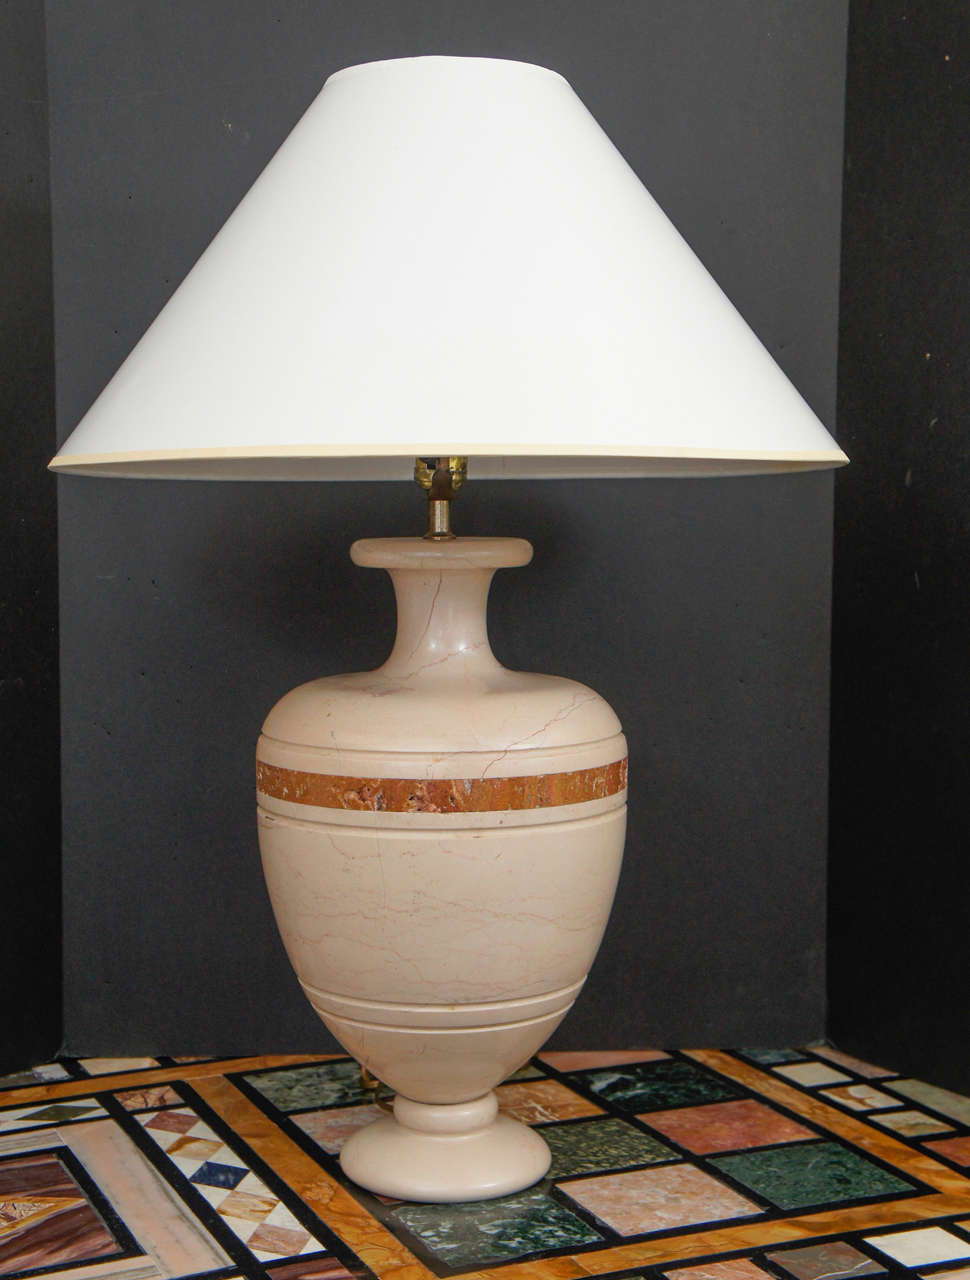 This pair of vintage 1970s Italian table lamps are made from carved travertine that has been inlaid with a rouge marble band. Carved from a solid block the lamps are very substantial and heavy. Travertine a stone favored by the Romans and here used